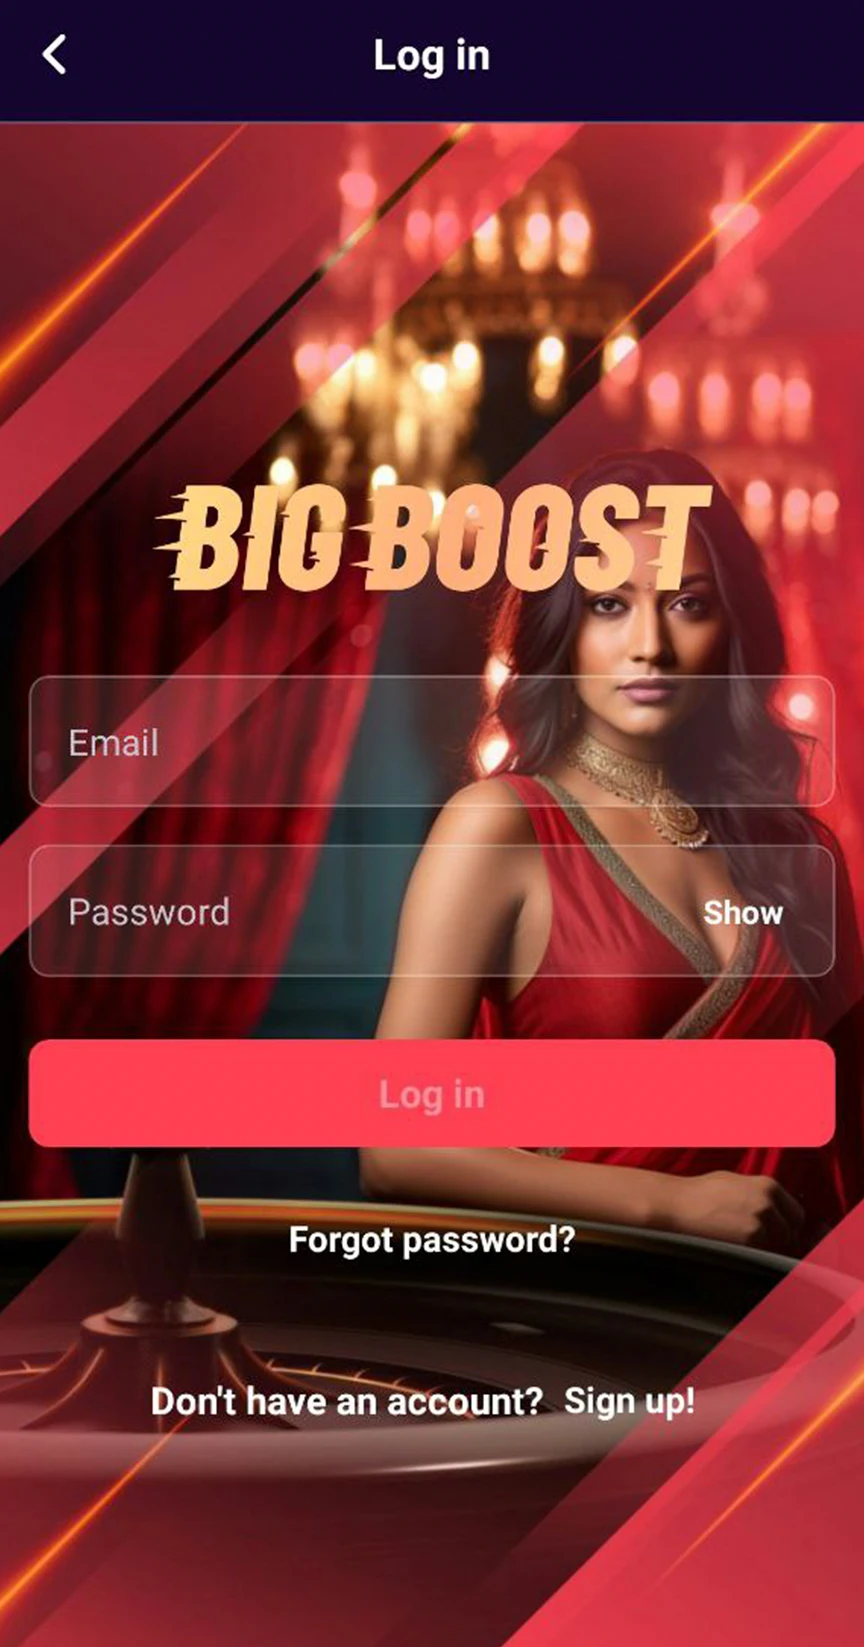 Log in for the Big Boost application for iOS.